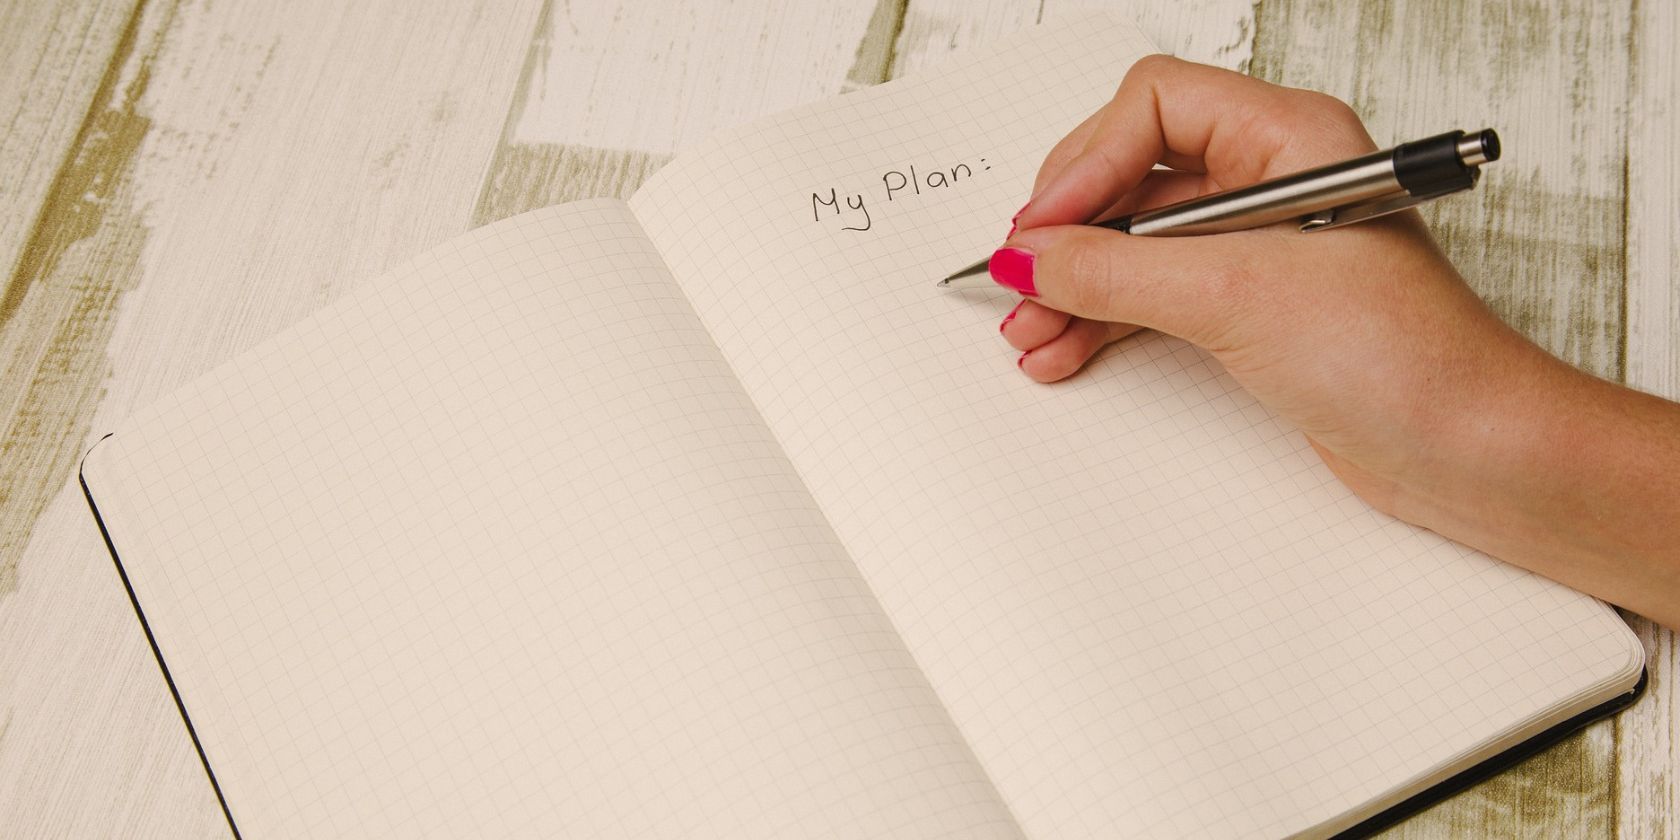 A hand writing a plan in a diary